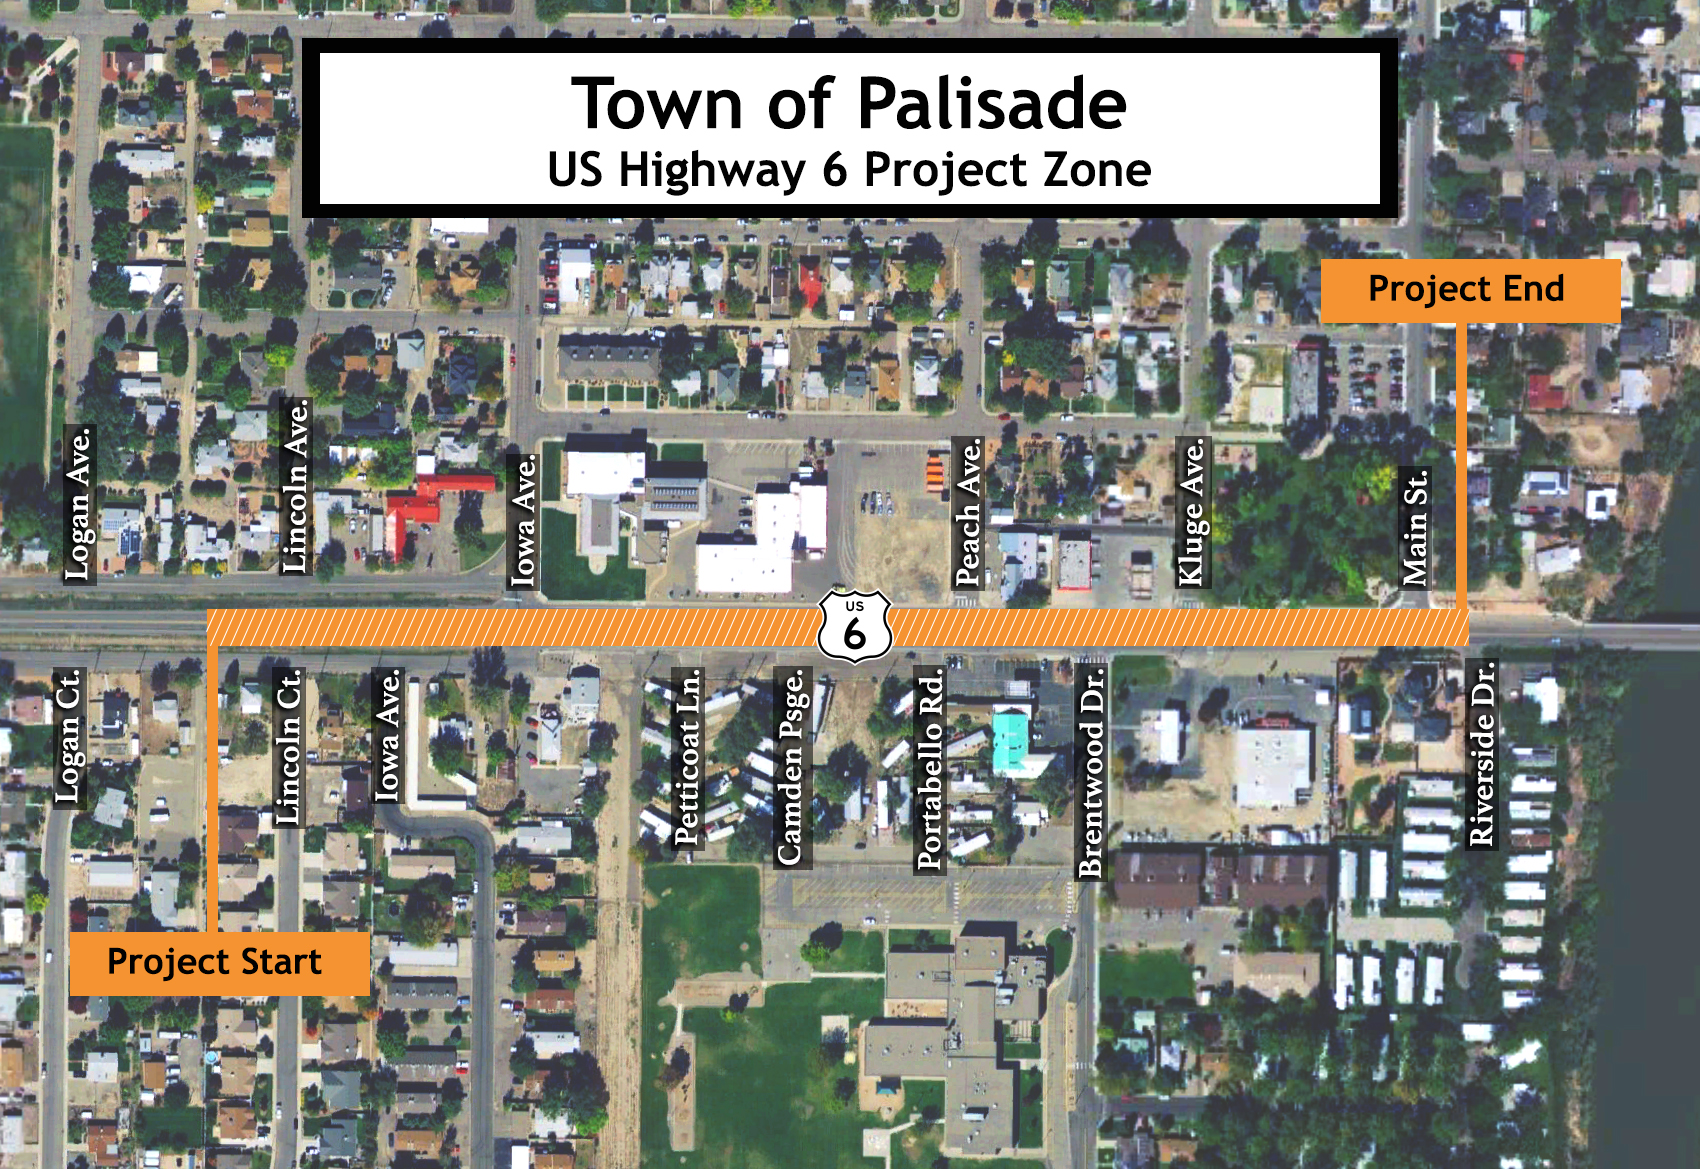 Palisade Project Zone.jpg detail image